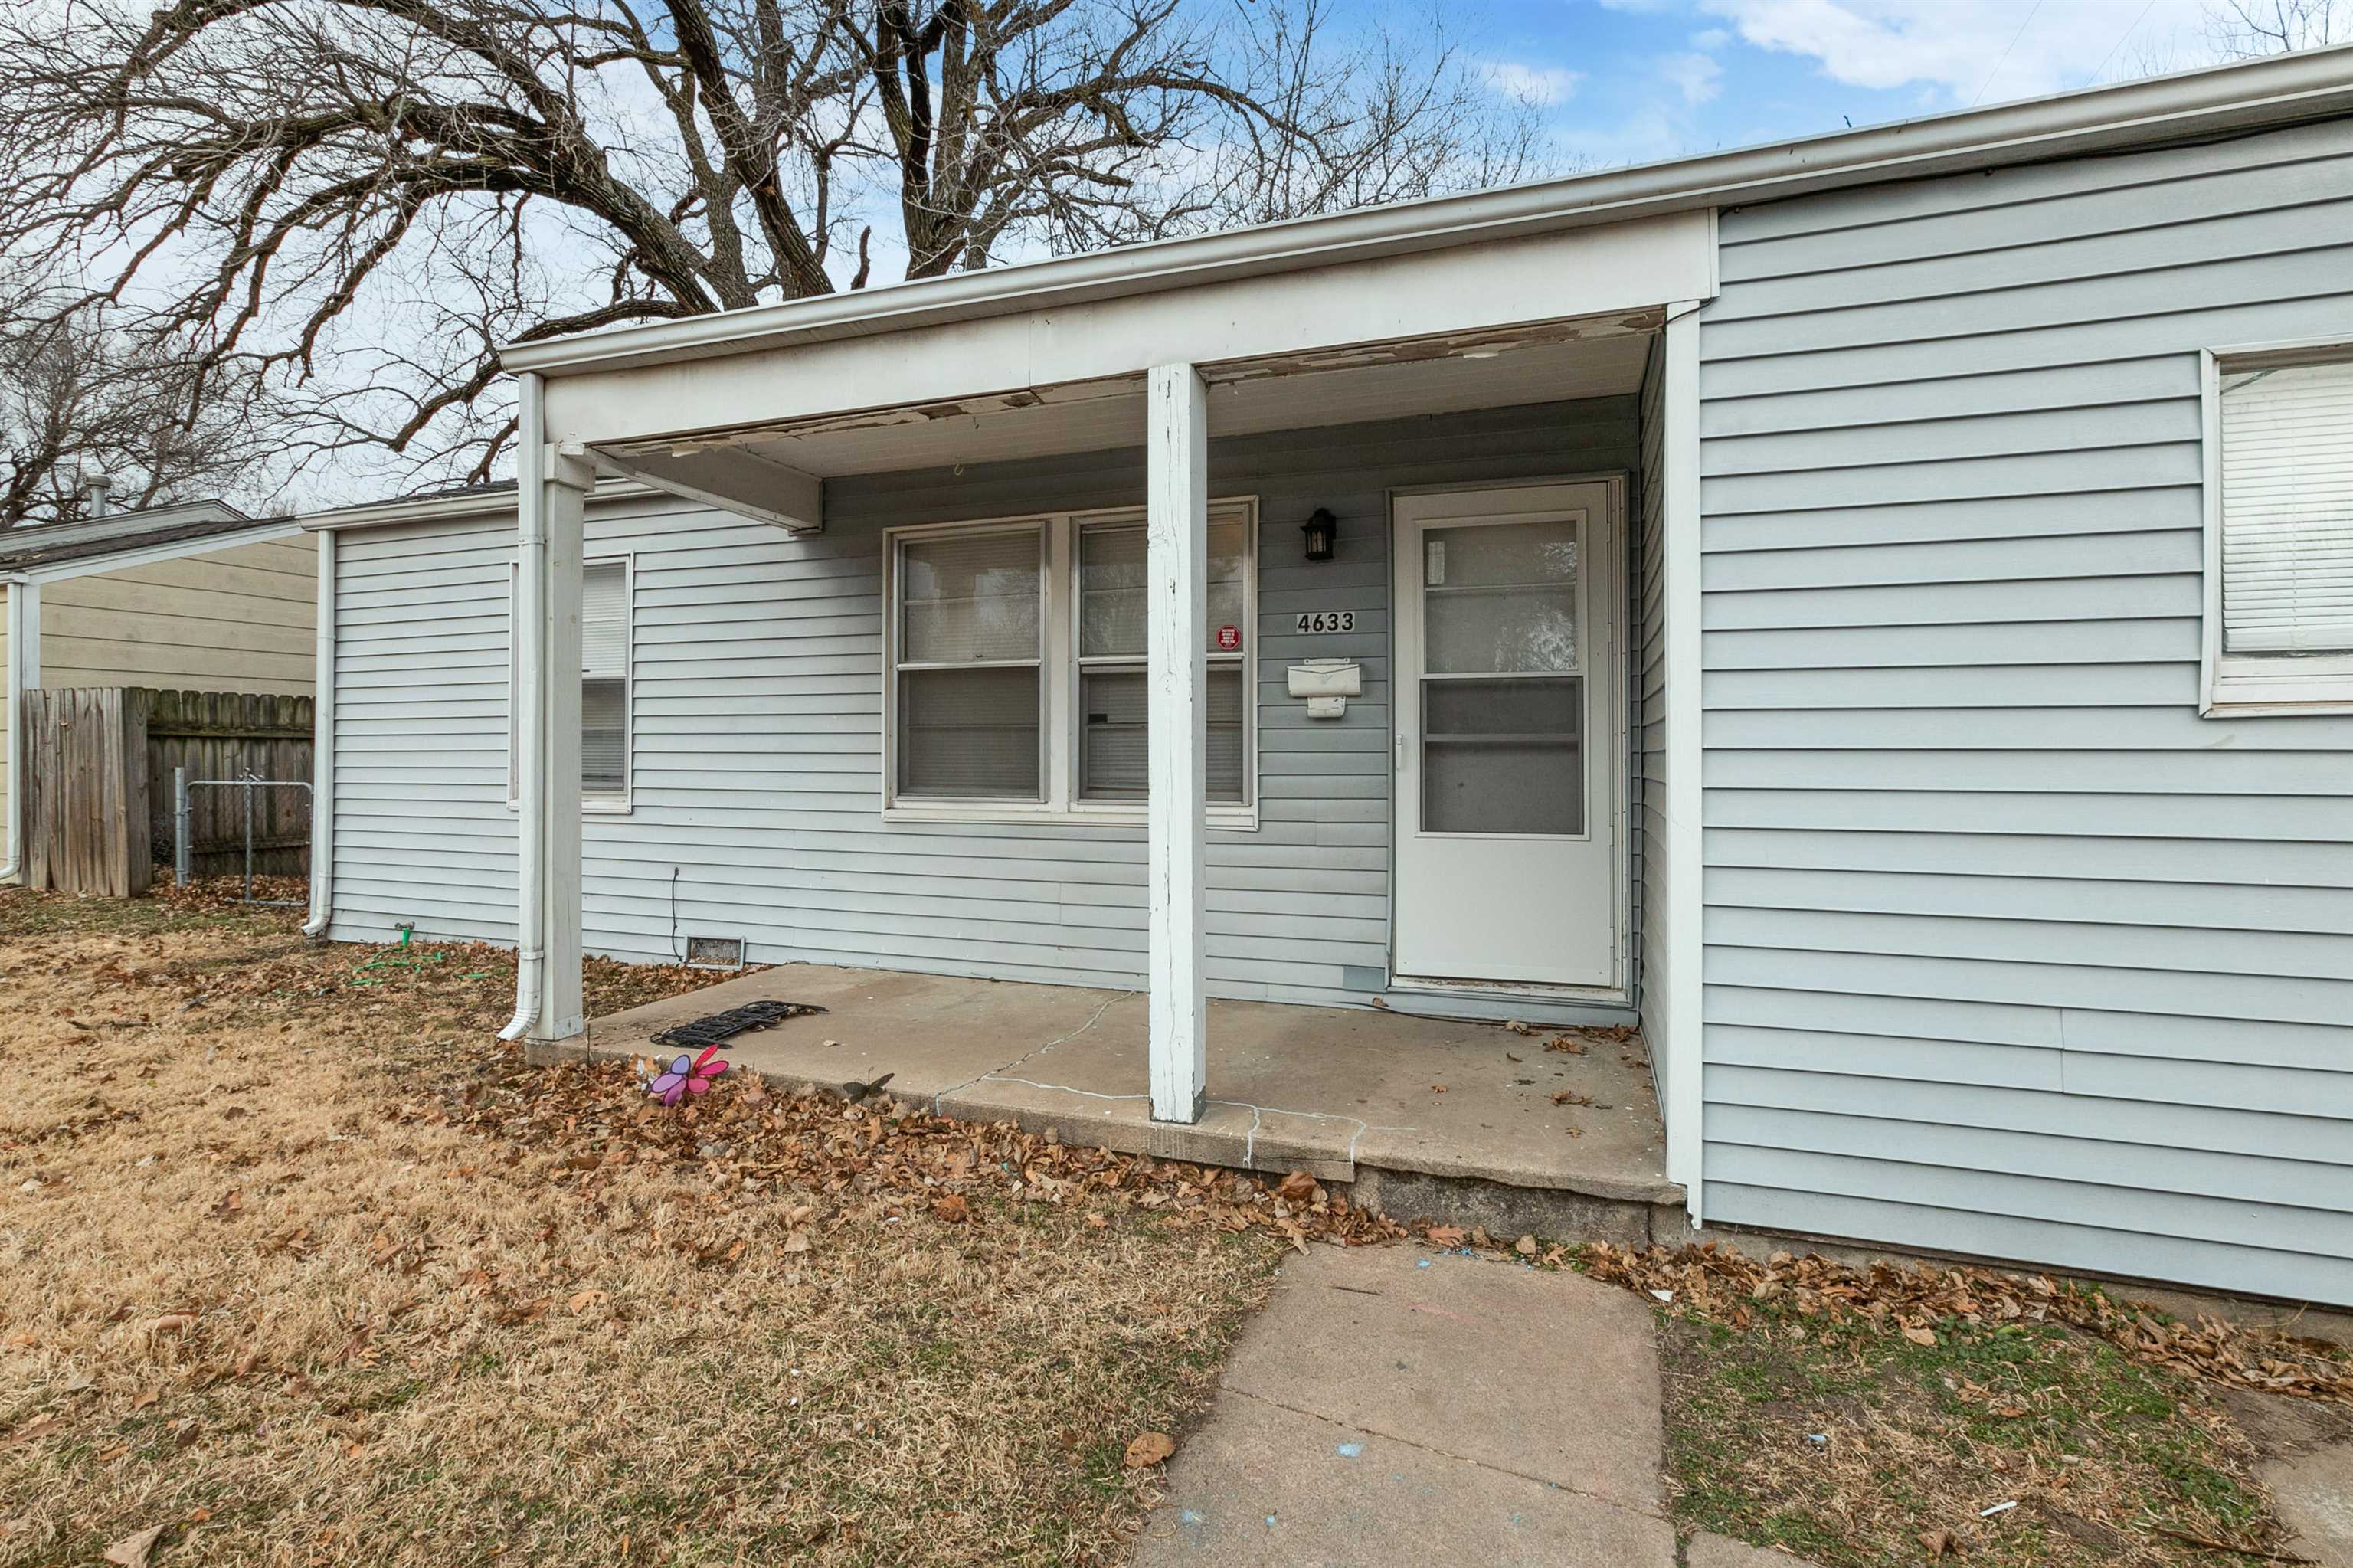 Huge garage in back! This 3 bedroom 1 bath is a spacious home with an extra bonus room and new carpe